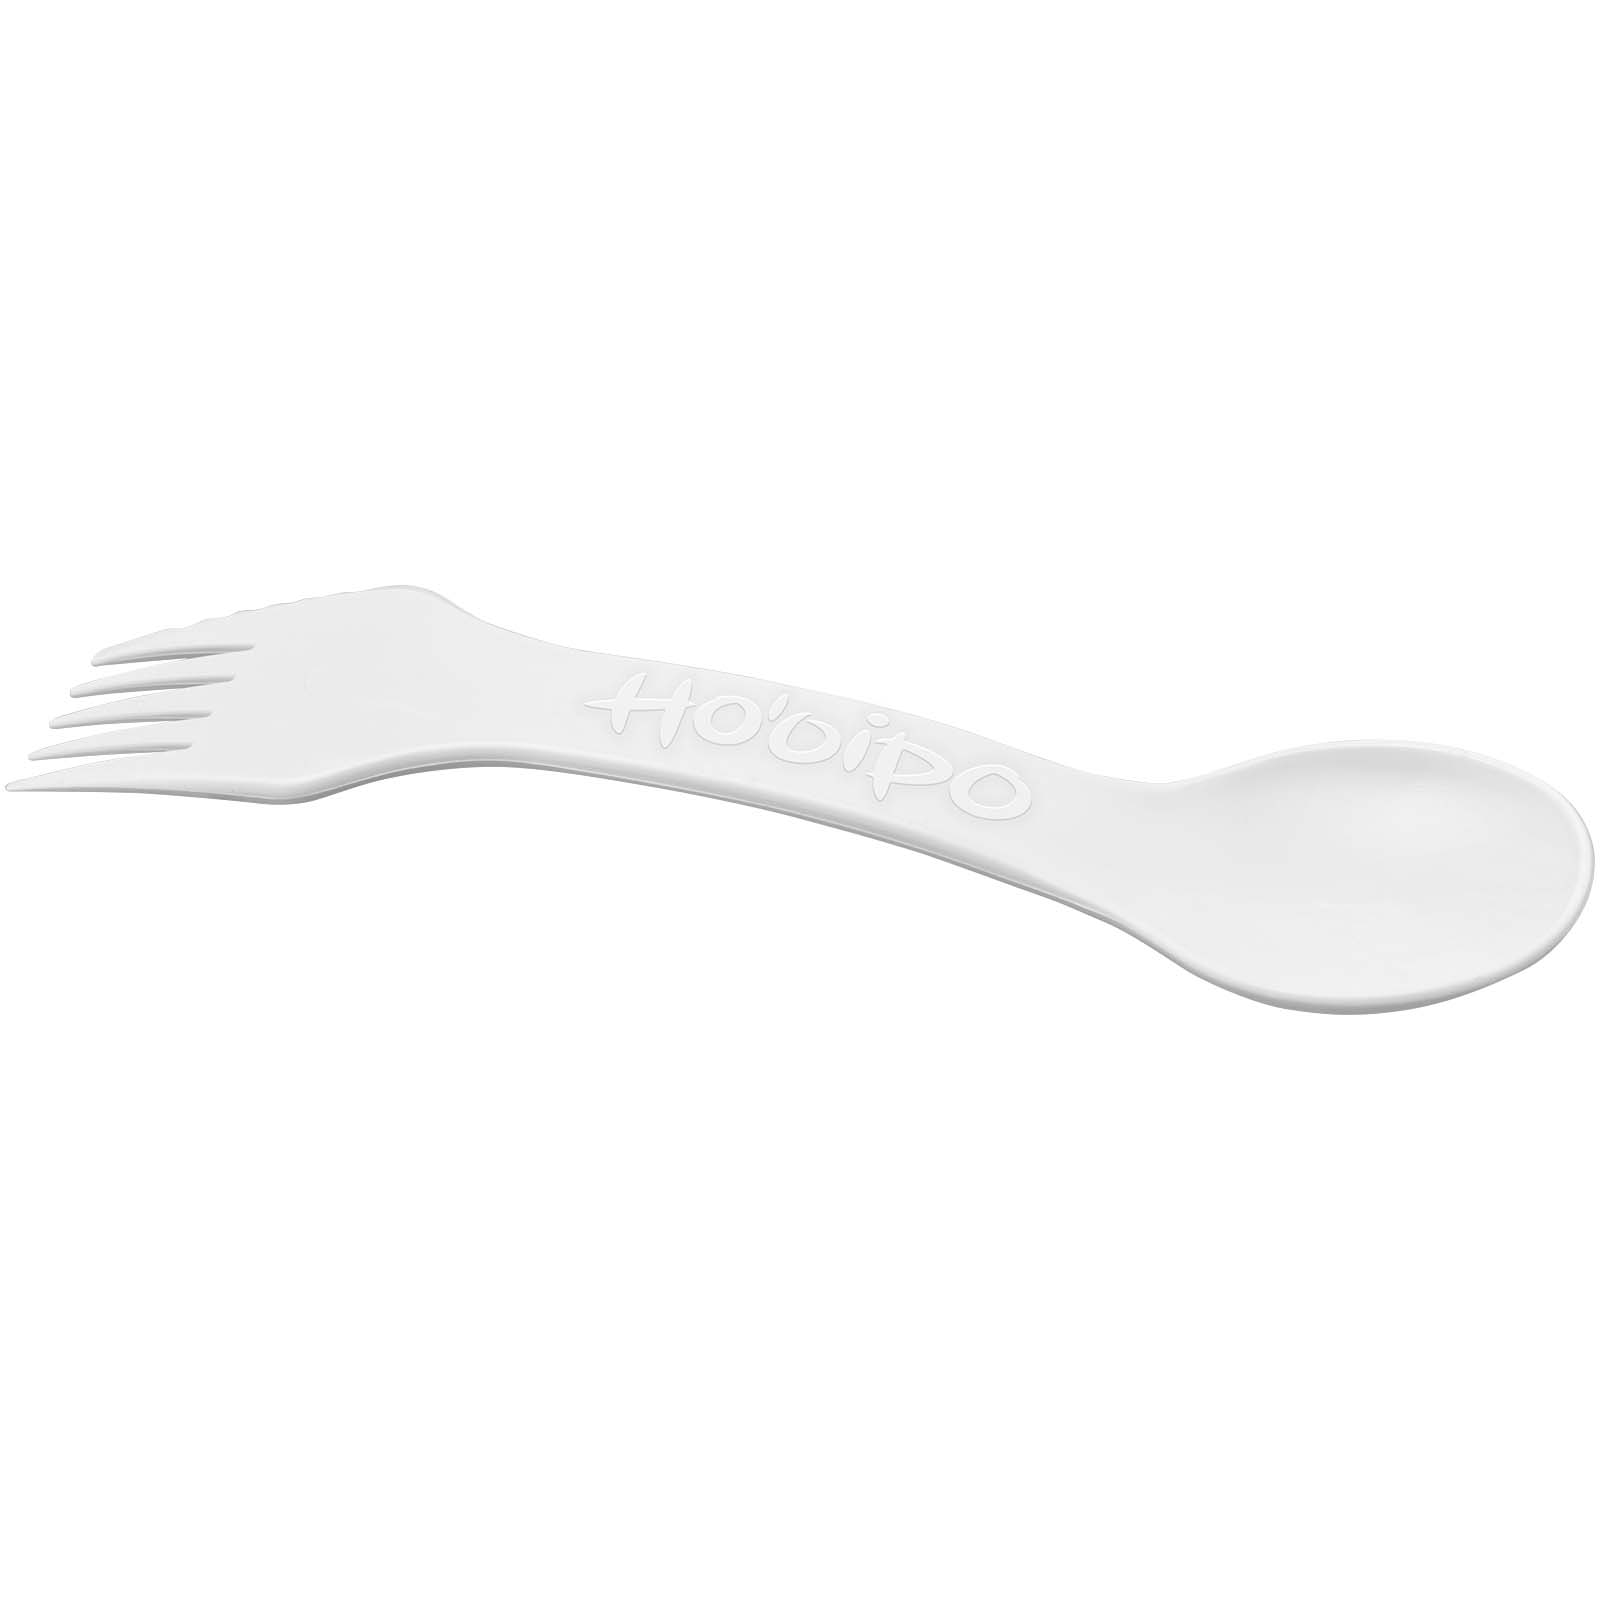 Advertising Home Accessories - Epsy Rise spork